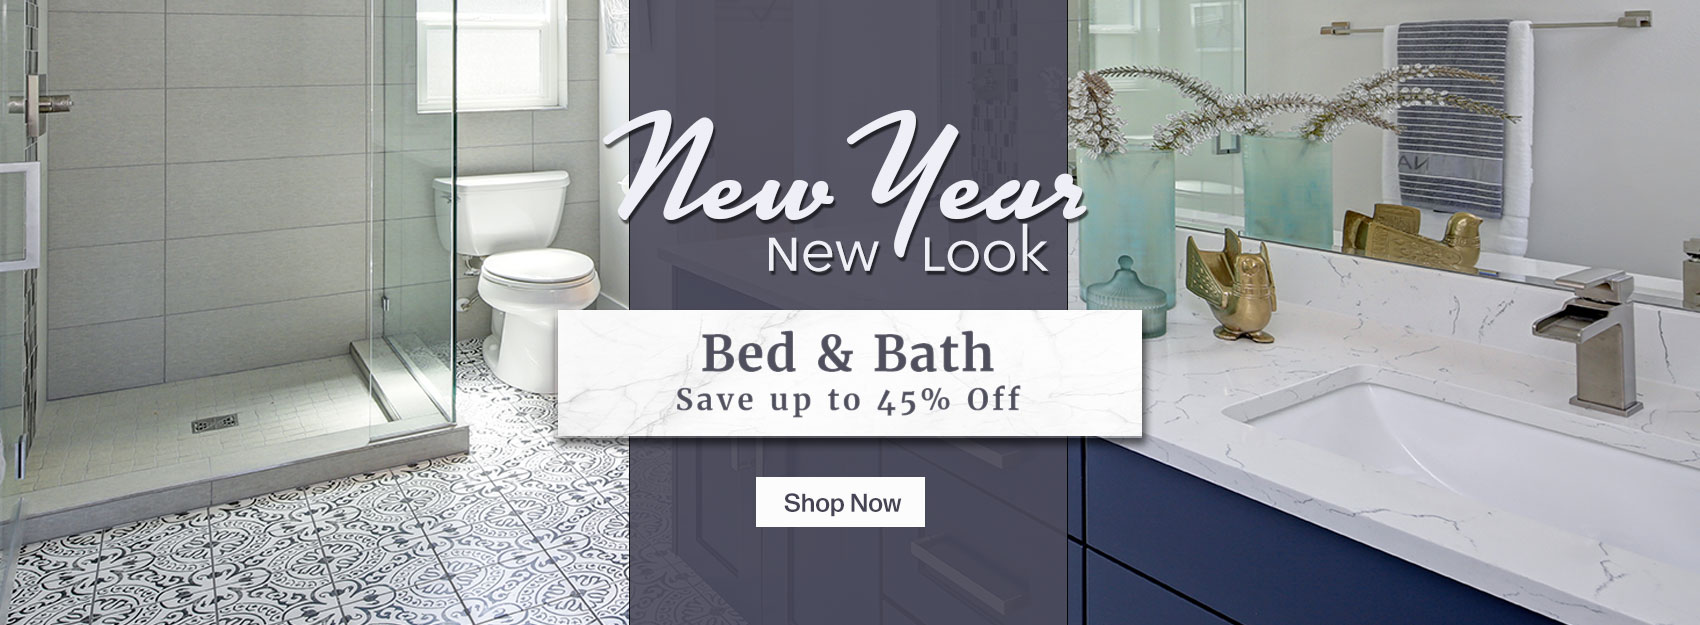 Save up to 25% and take an extra 5% off your entire order as part of the Winter Bath Sale Event.